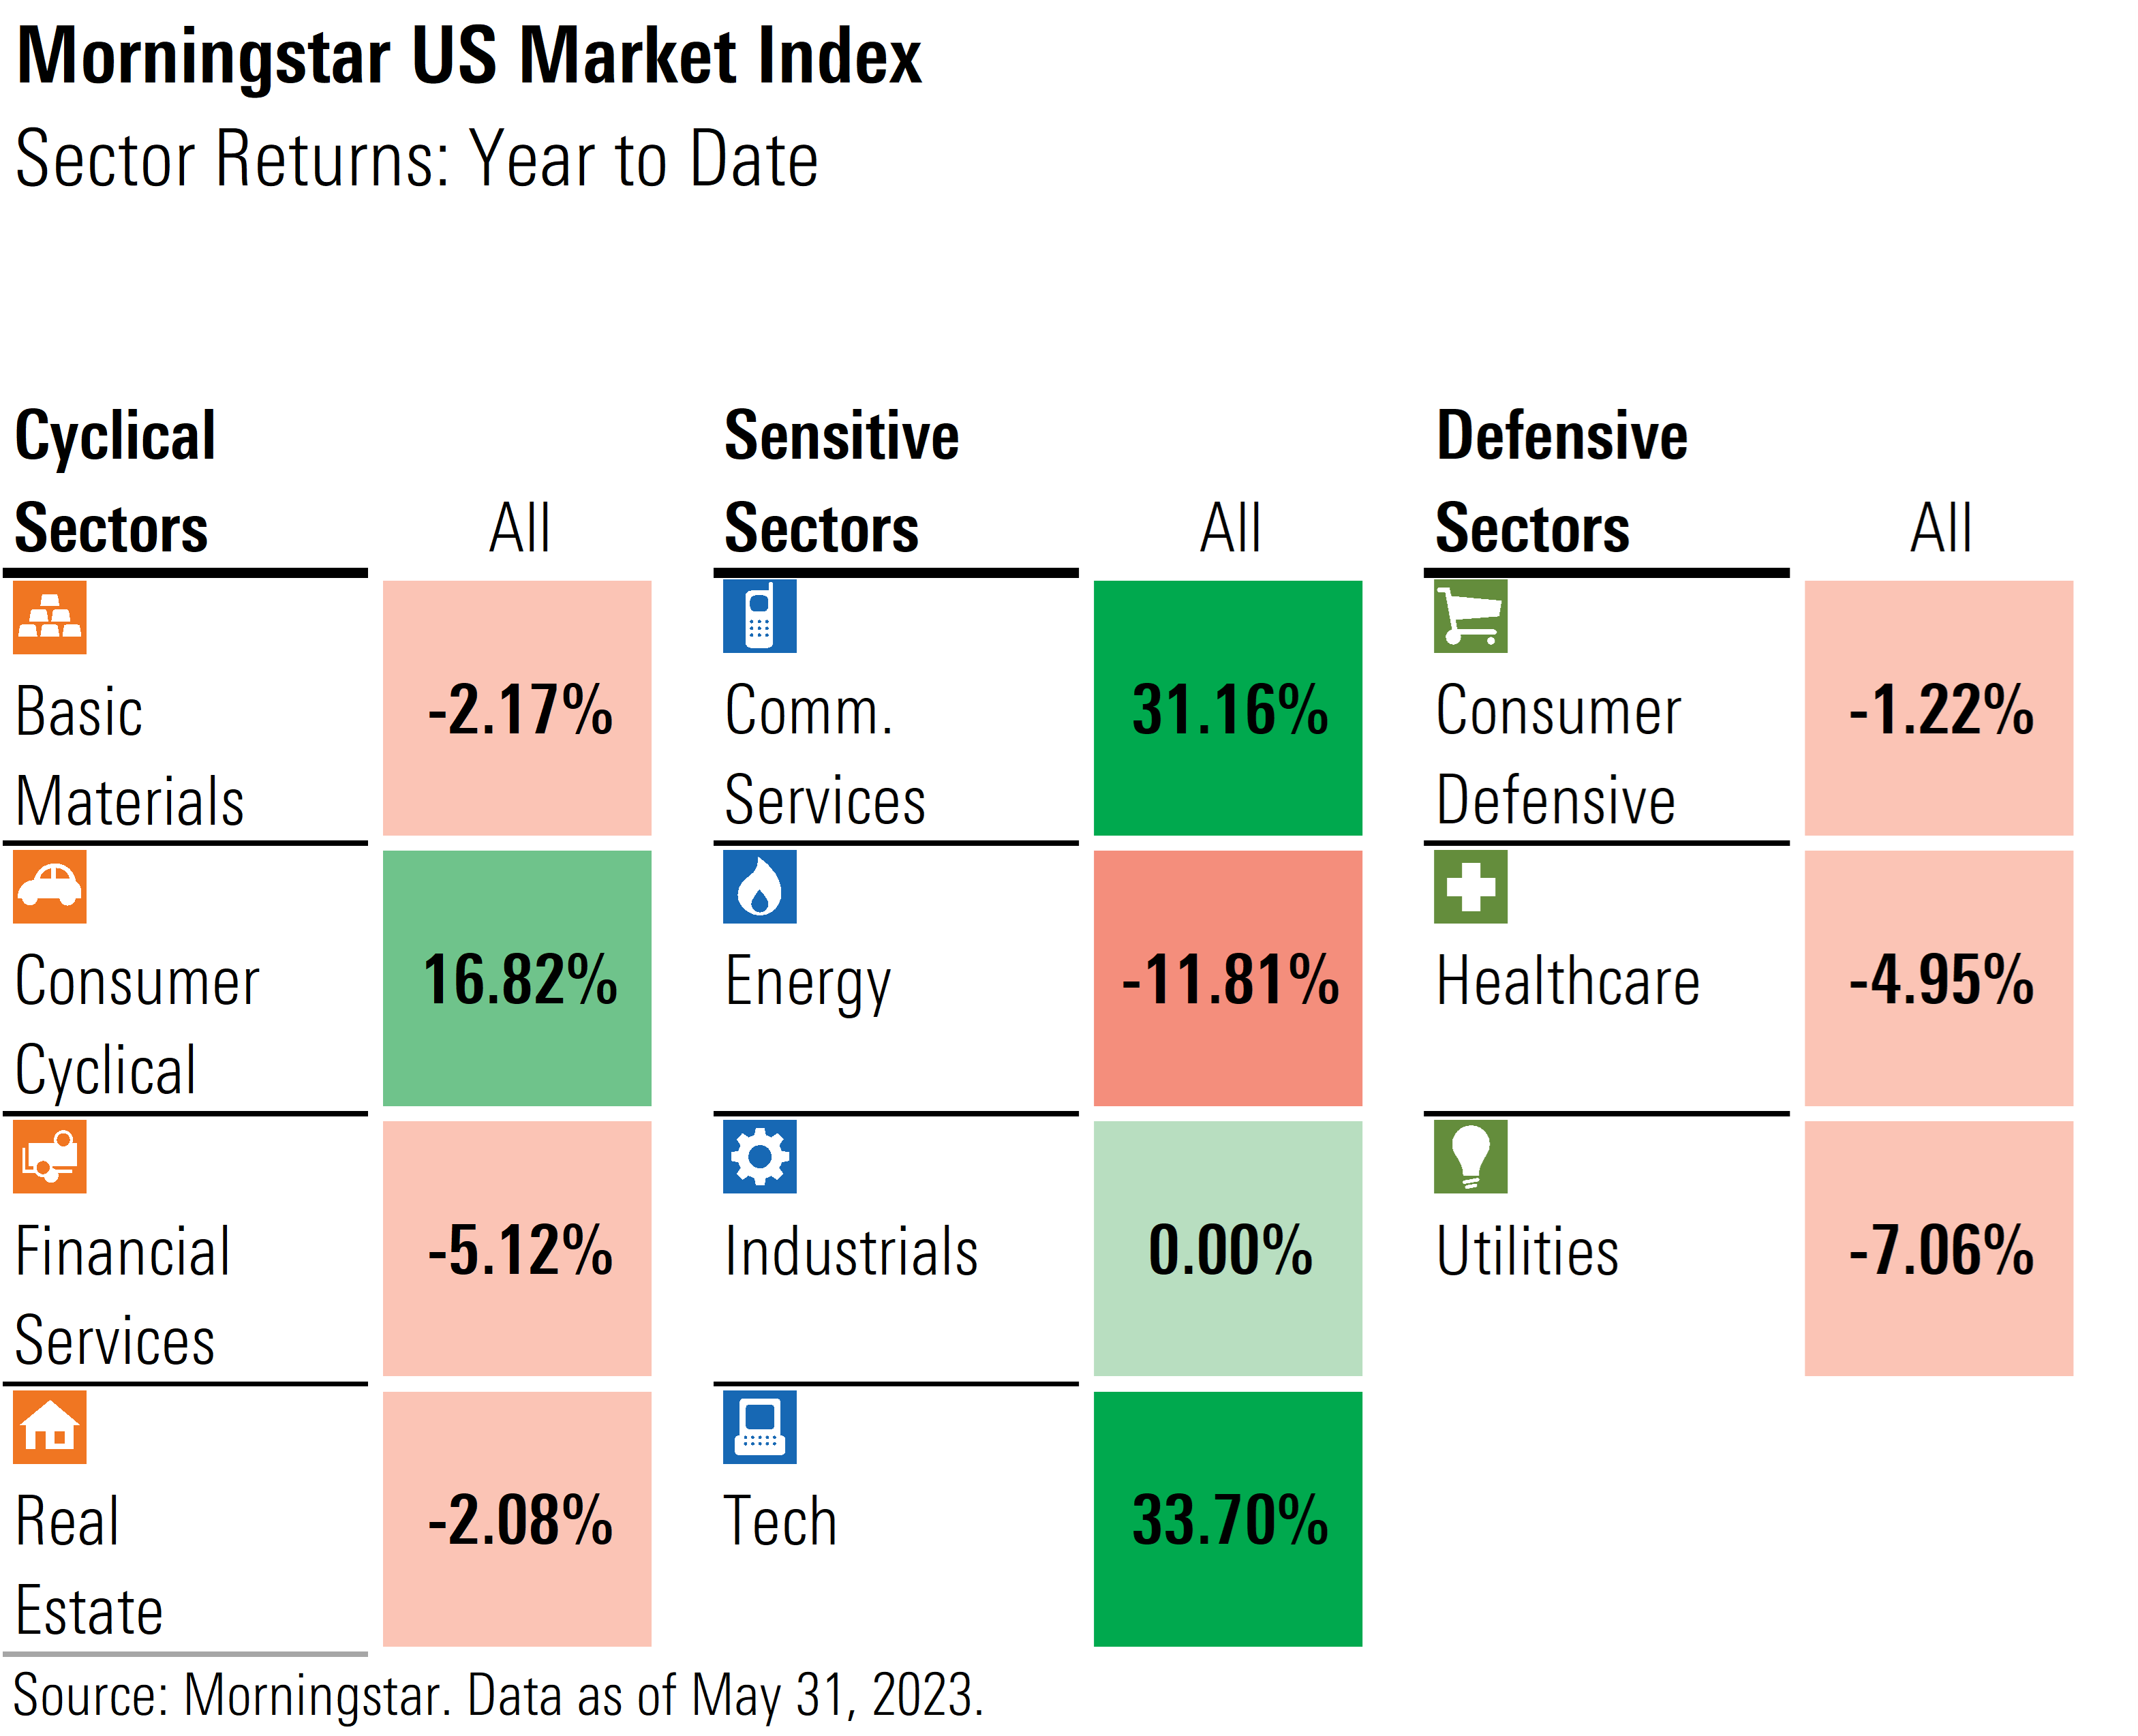 Graphic containing the Morningstar US Market Index year to date returns by sector